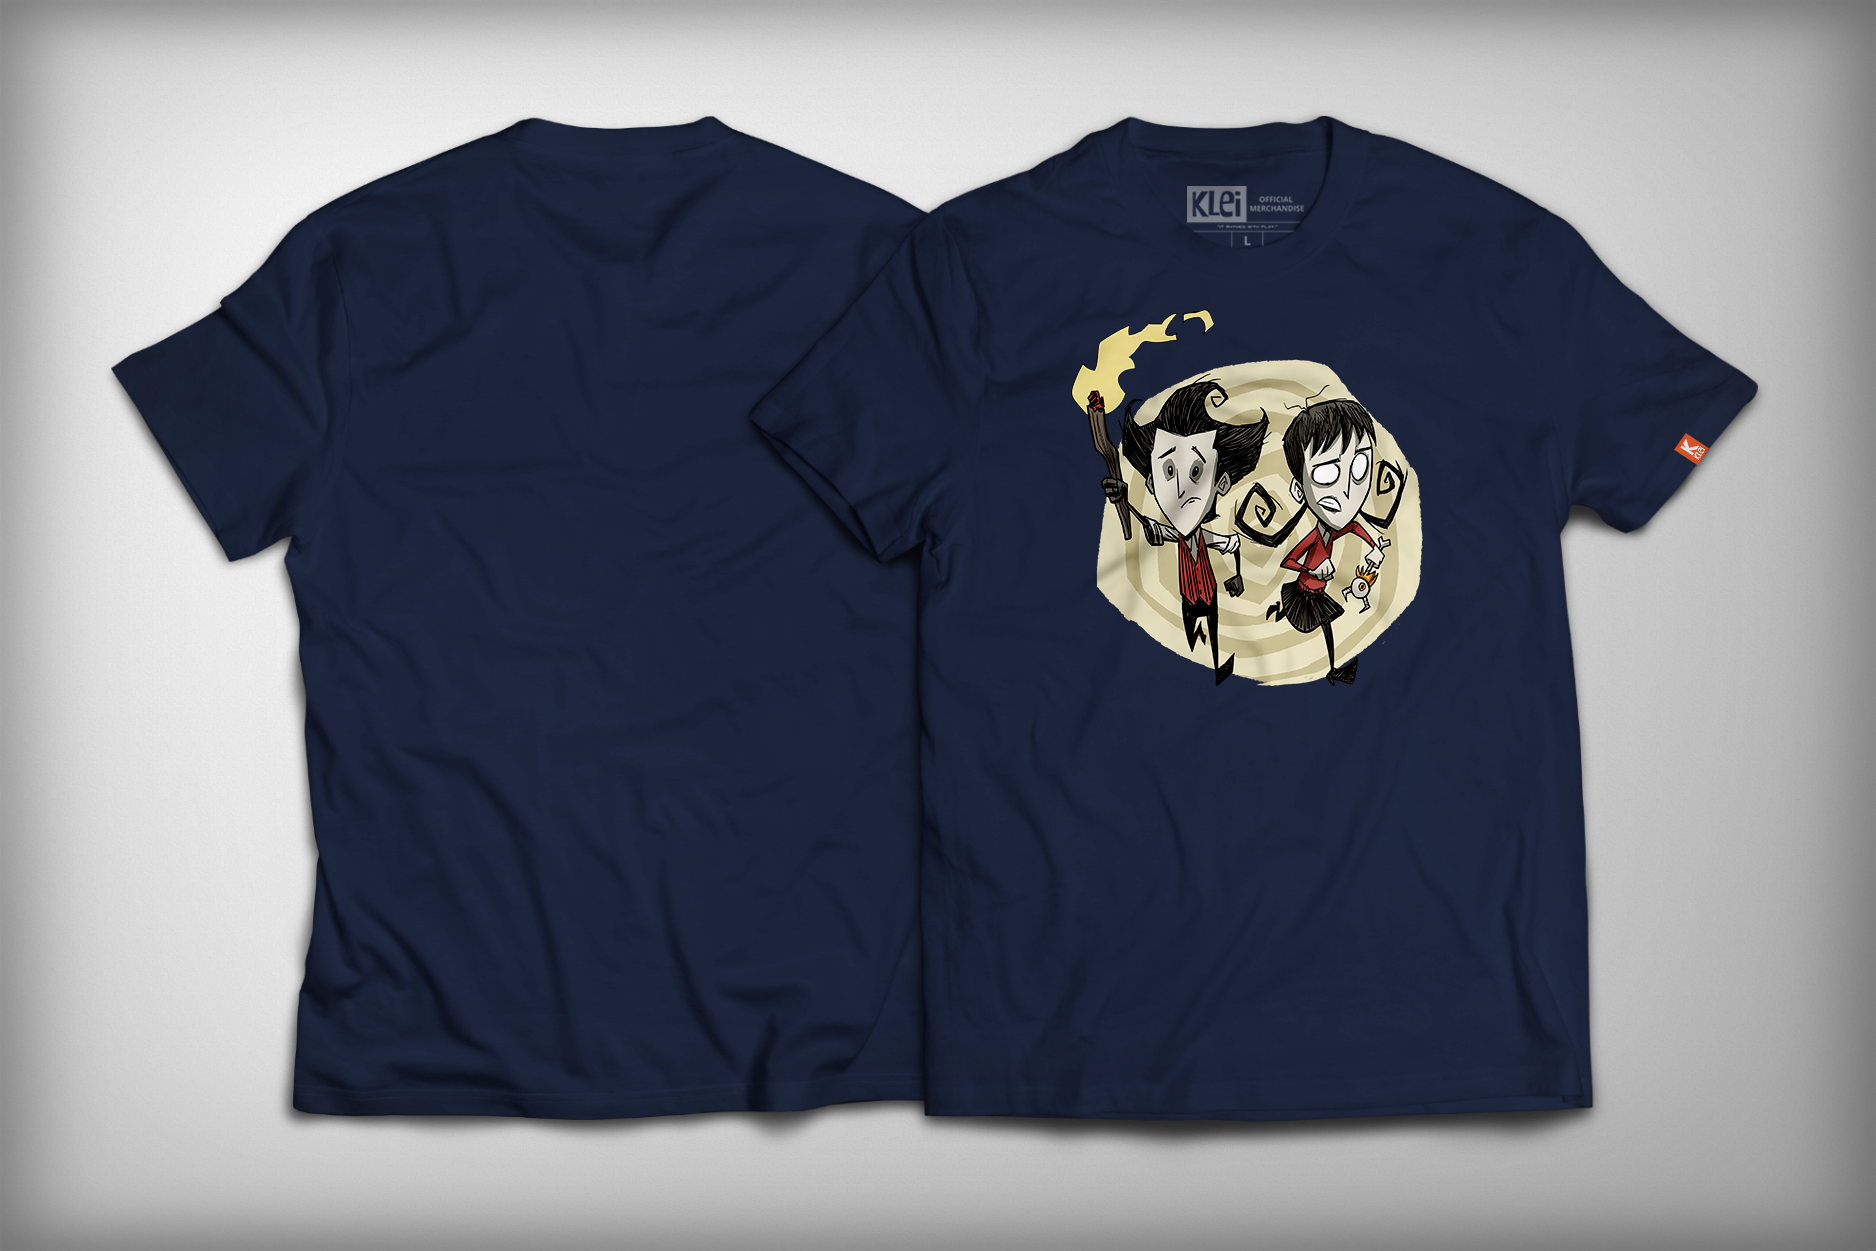 Wilson and Willow Through the Portal Navy Shirt Front and Back image